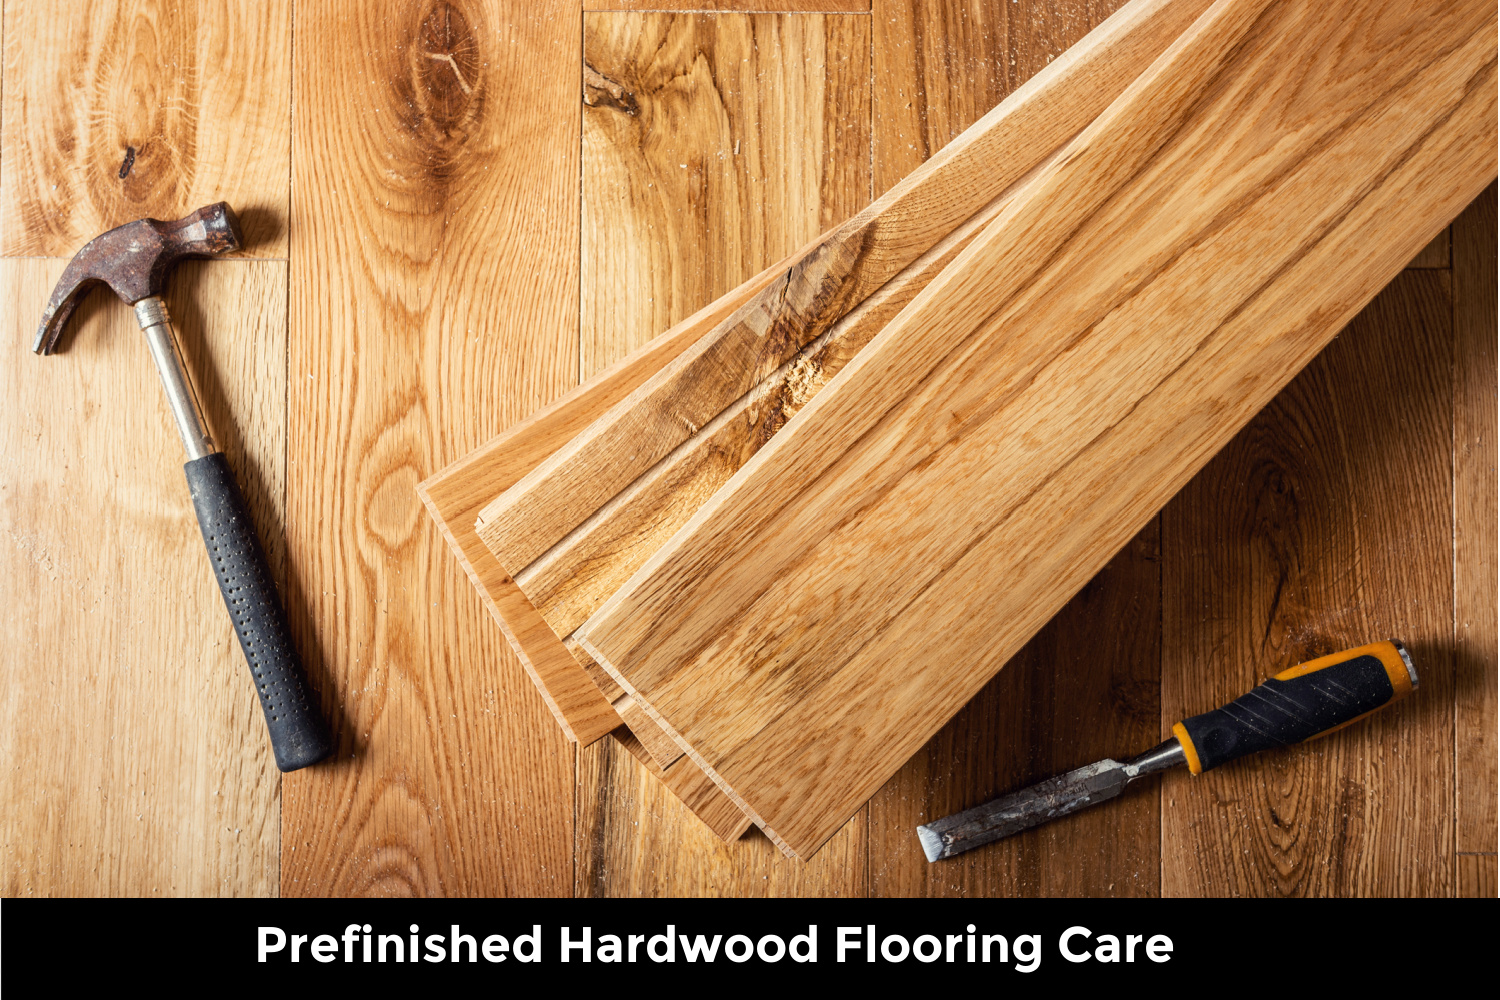 Prefinished Hardwood Flooring Care and Maintenance Guide